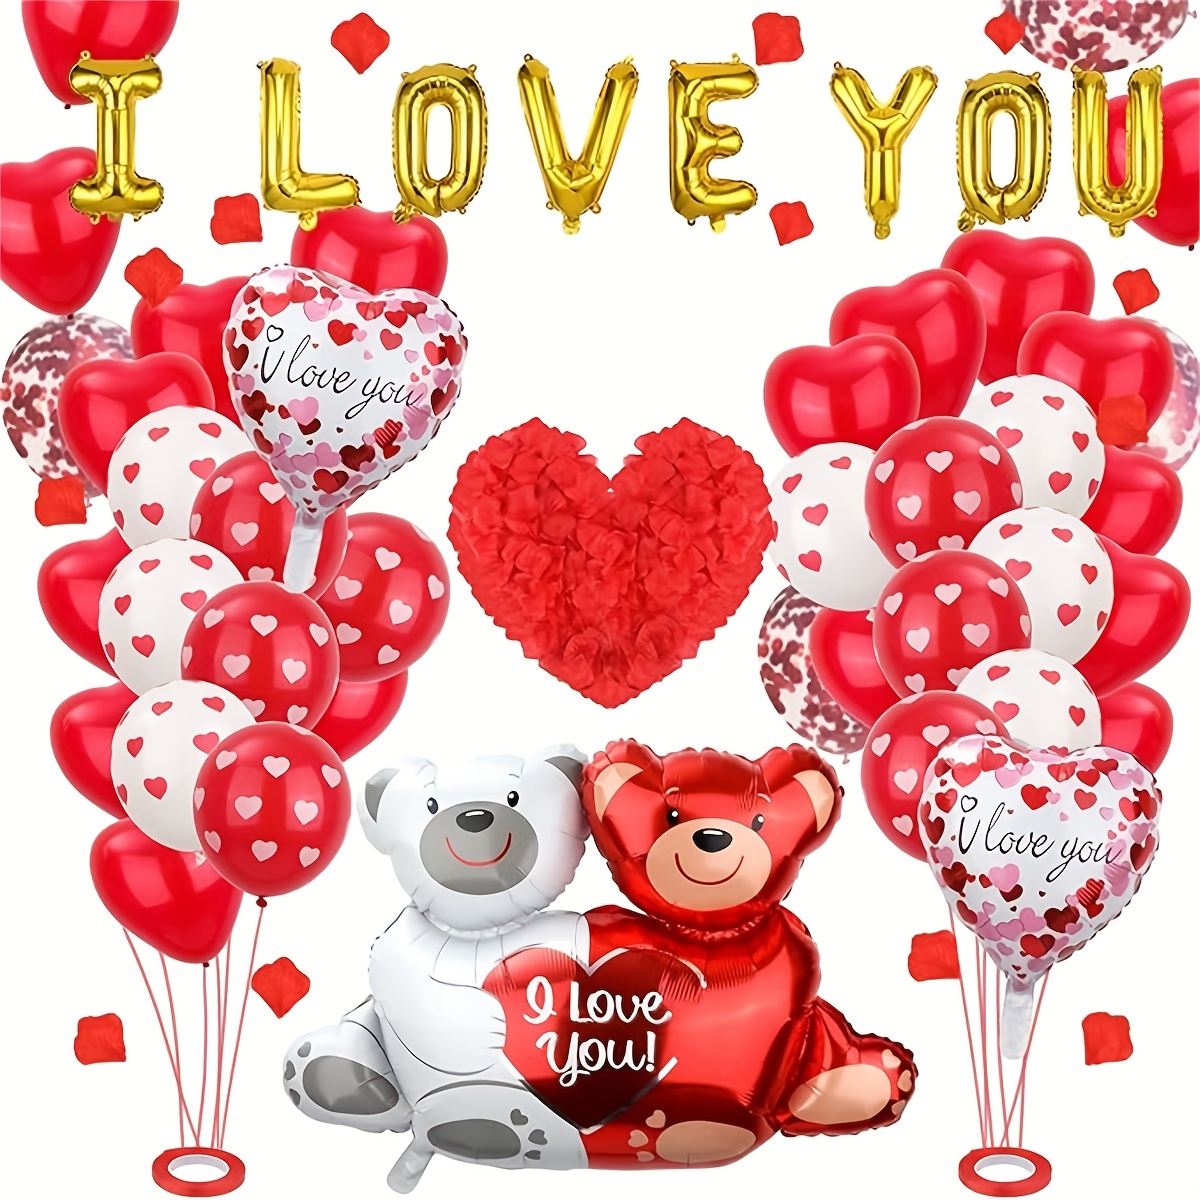 

1058pcs Red Heart Balloons Heart Bear Balloons Valentine's Day Balloons Set, Contains 1000pcs Rose Petals I Love You Balloons For Valentine's Day Party Anniversary Proposal Romantic Decoration